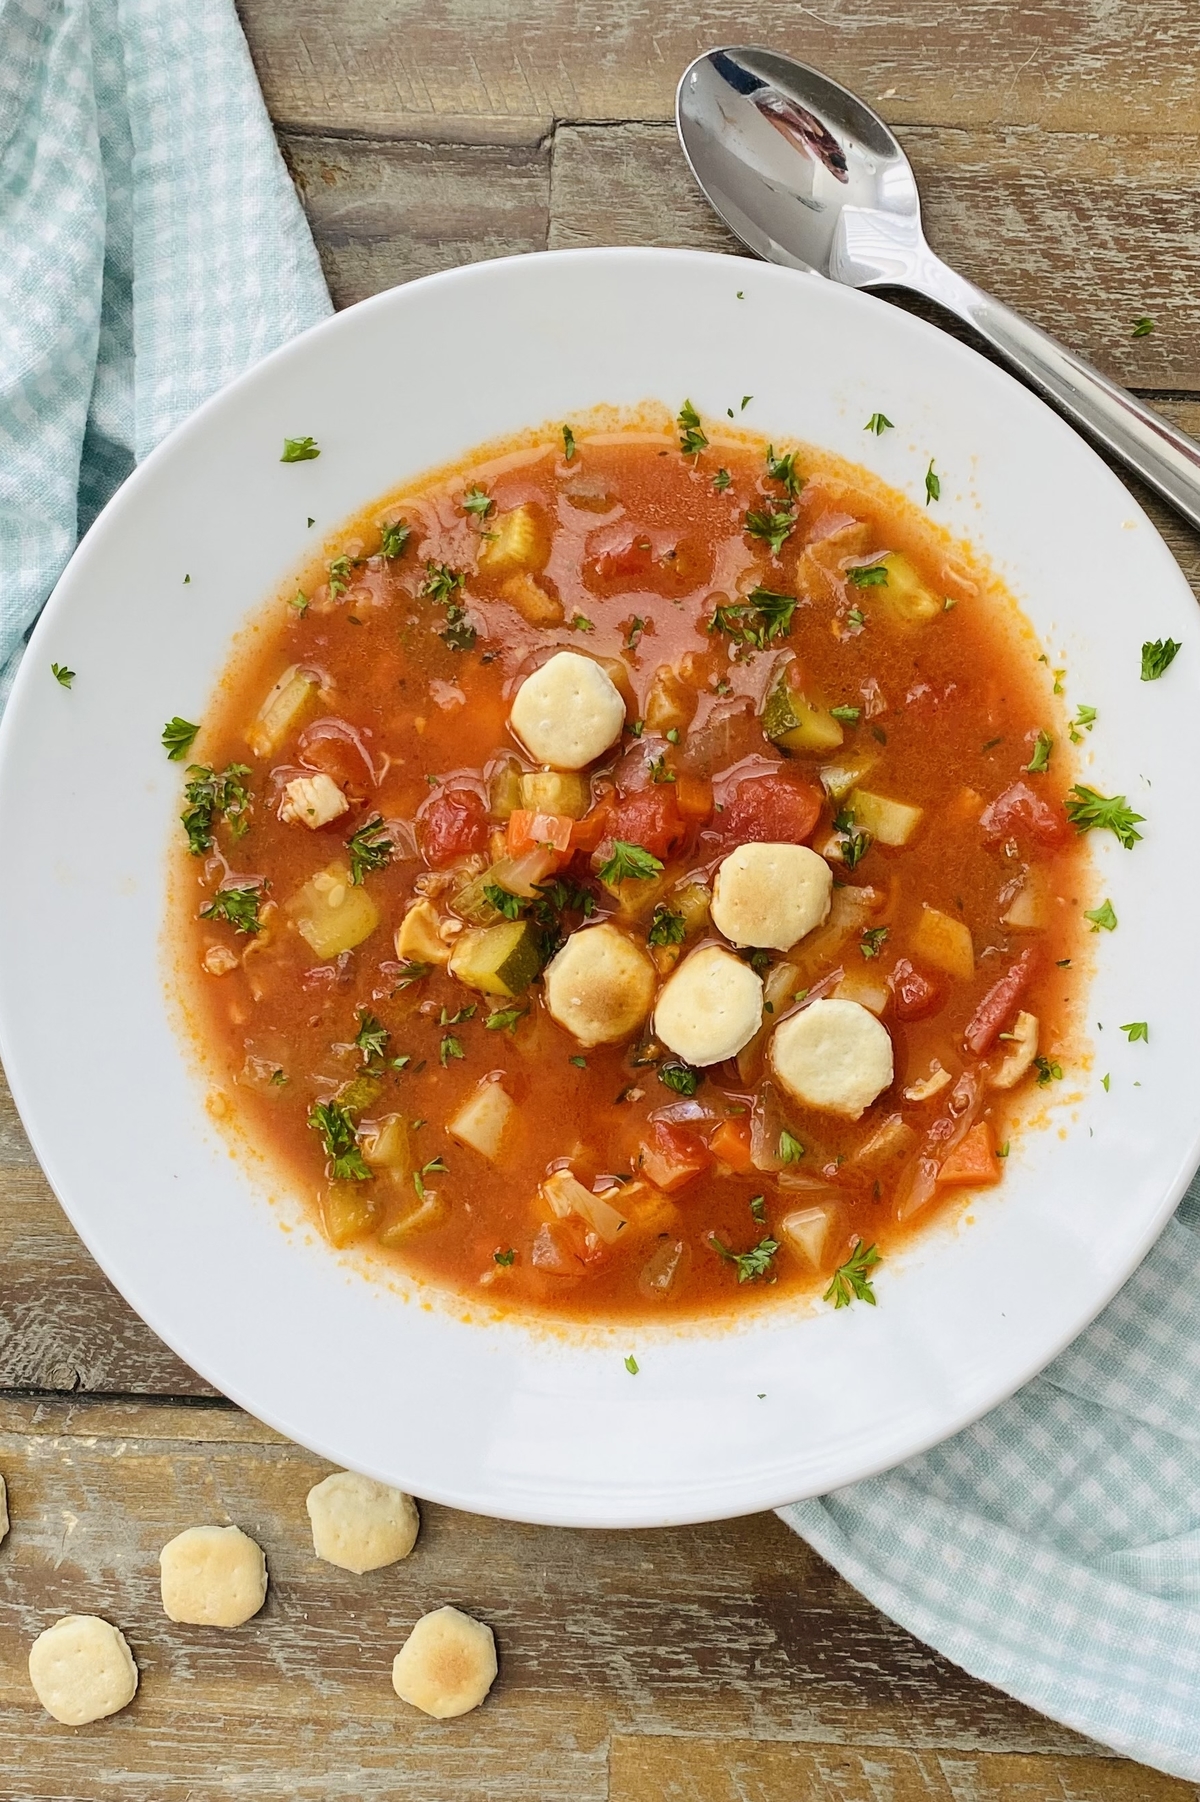 Manhattan clam chowder recipe in a bowl with oyster crackers